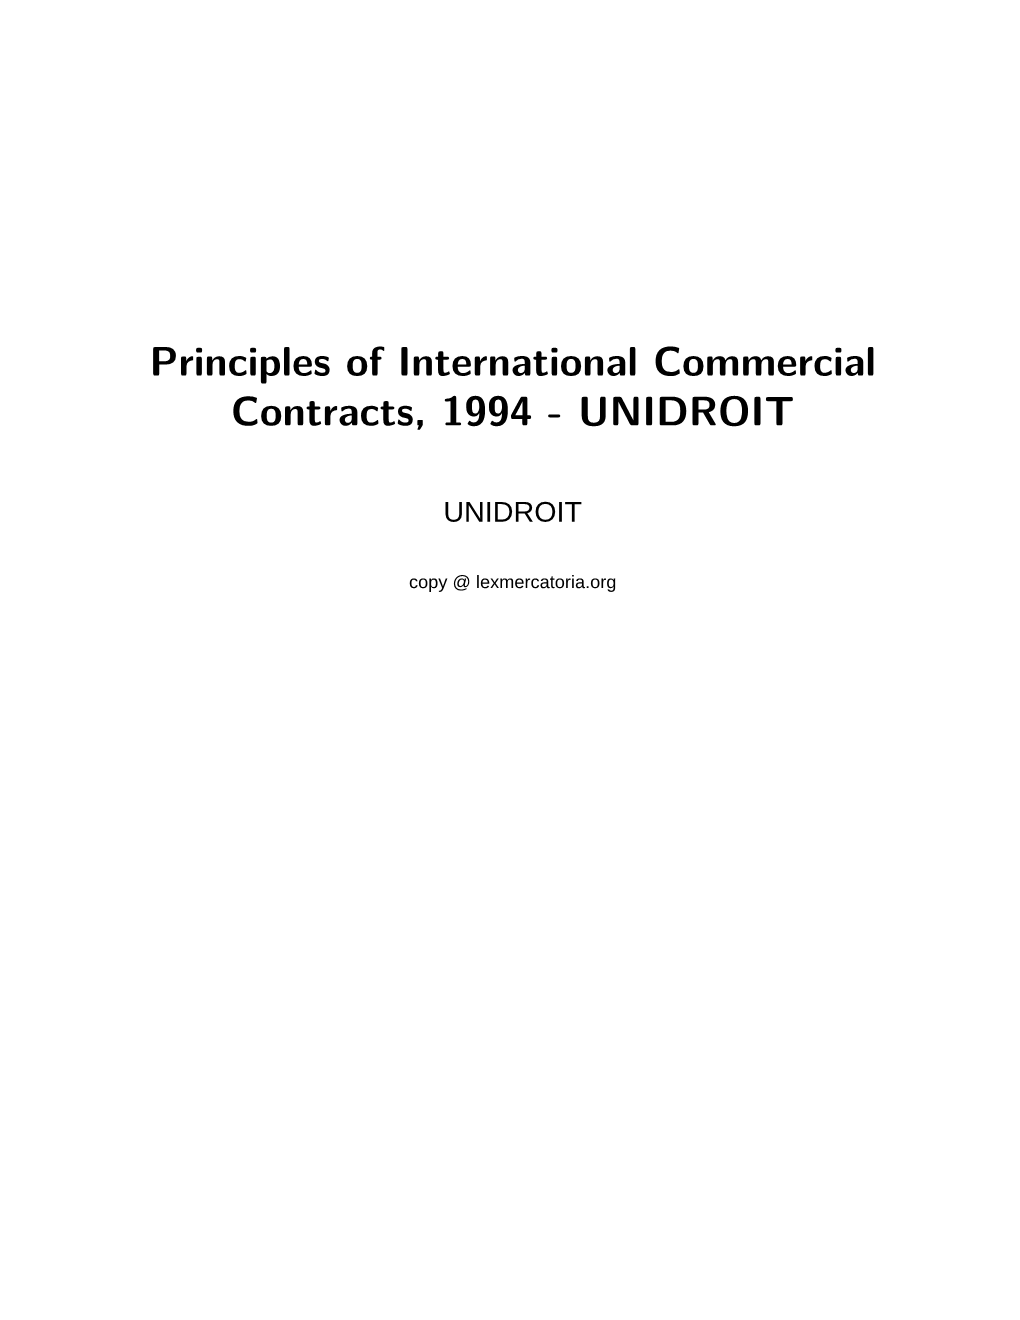 Principles of International Commercial Contracts, 1994 - UNIDROIT